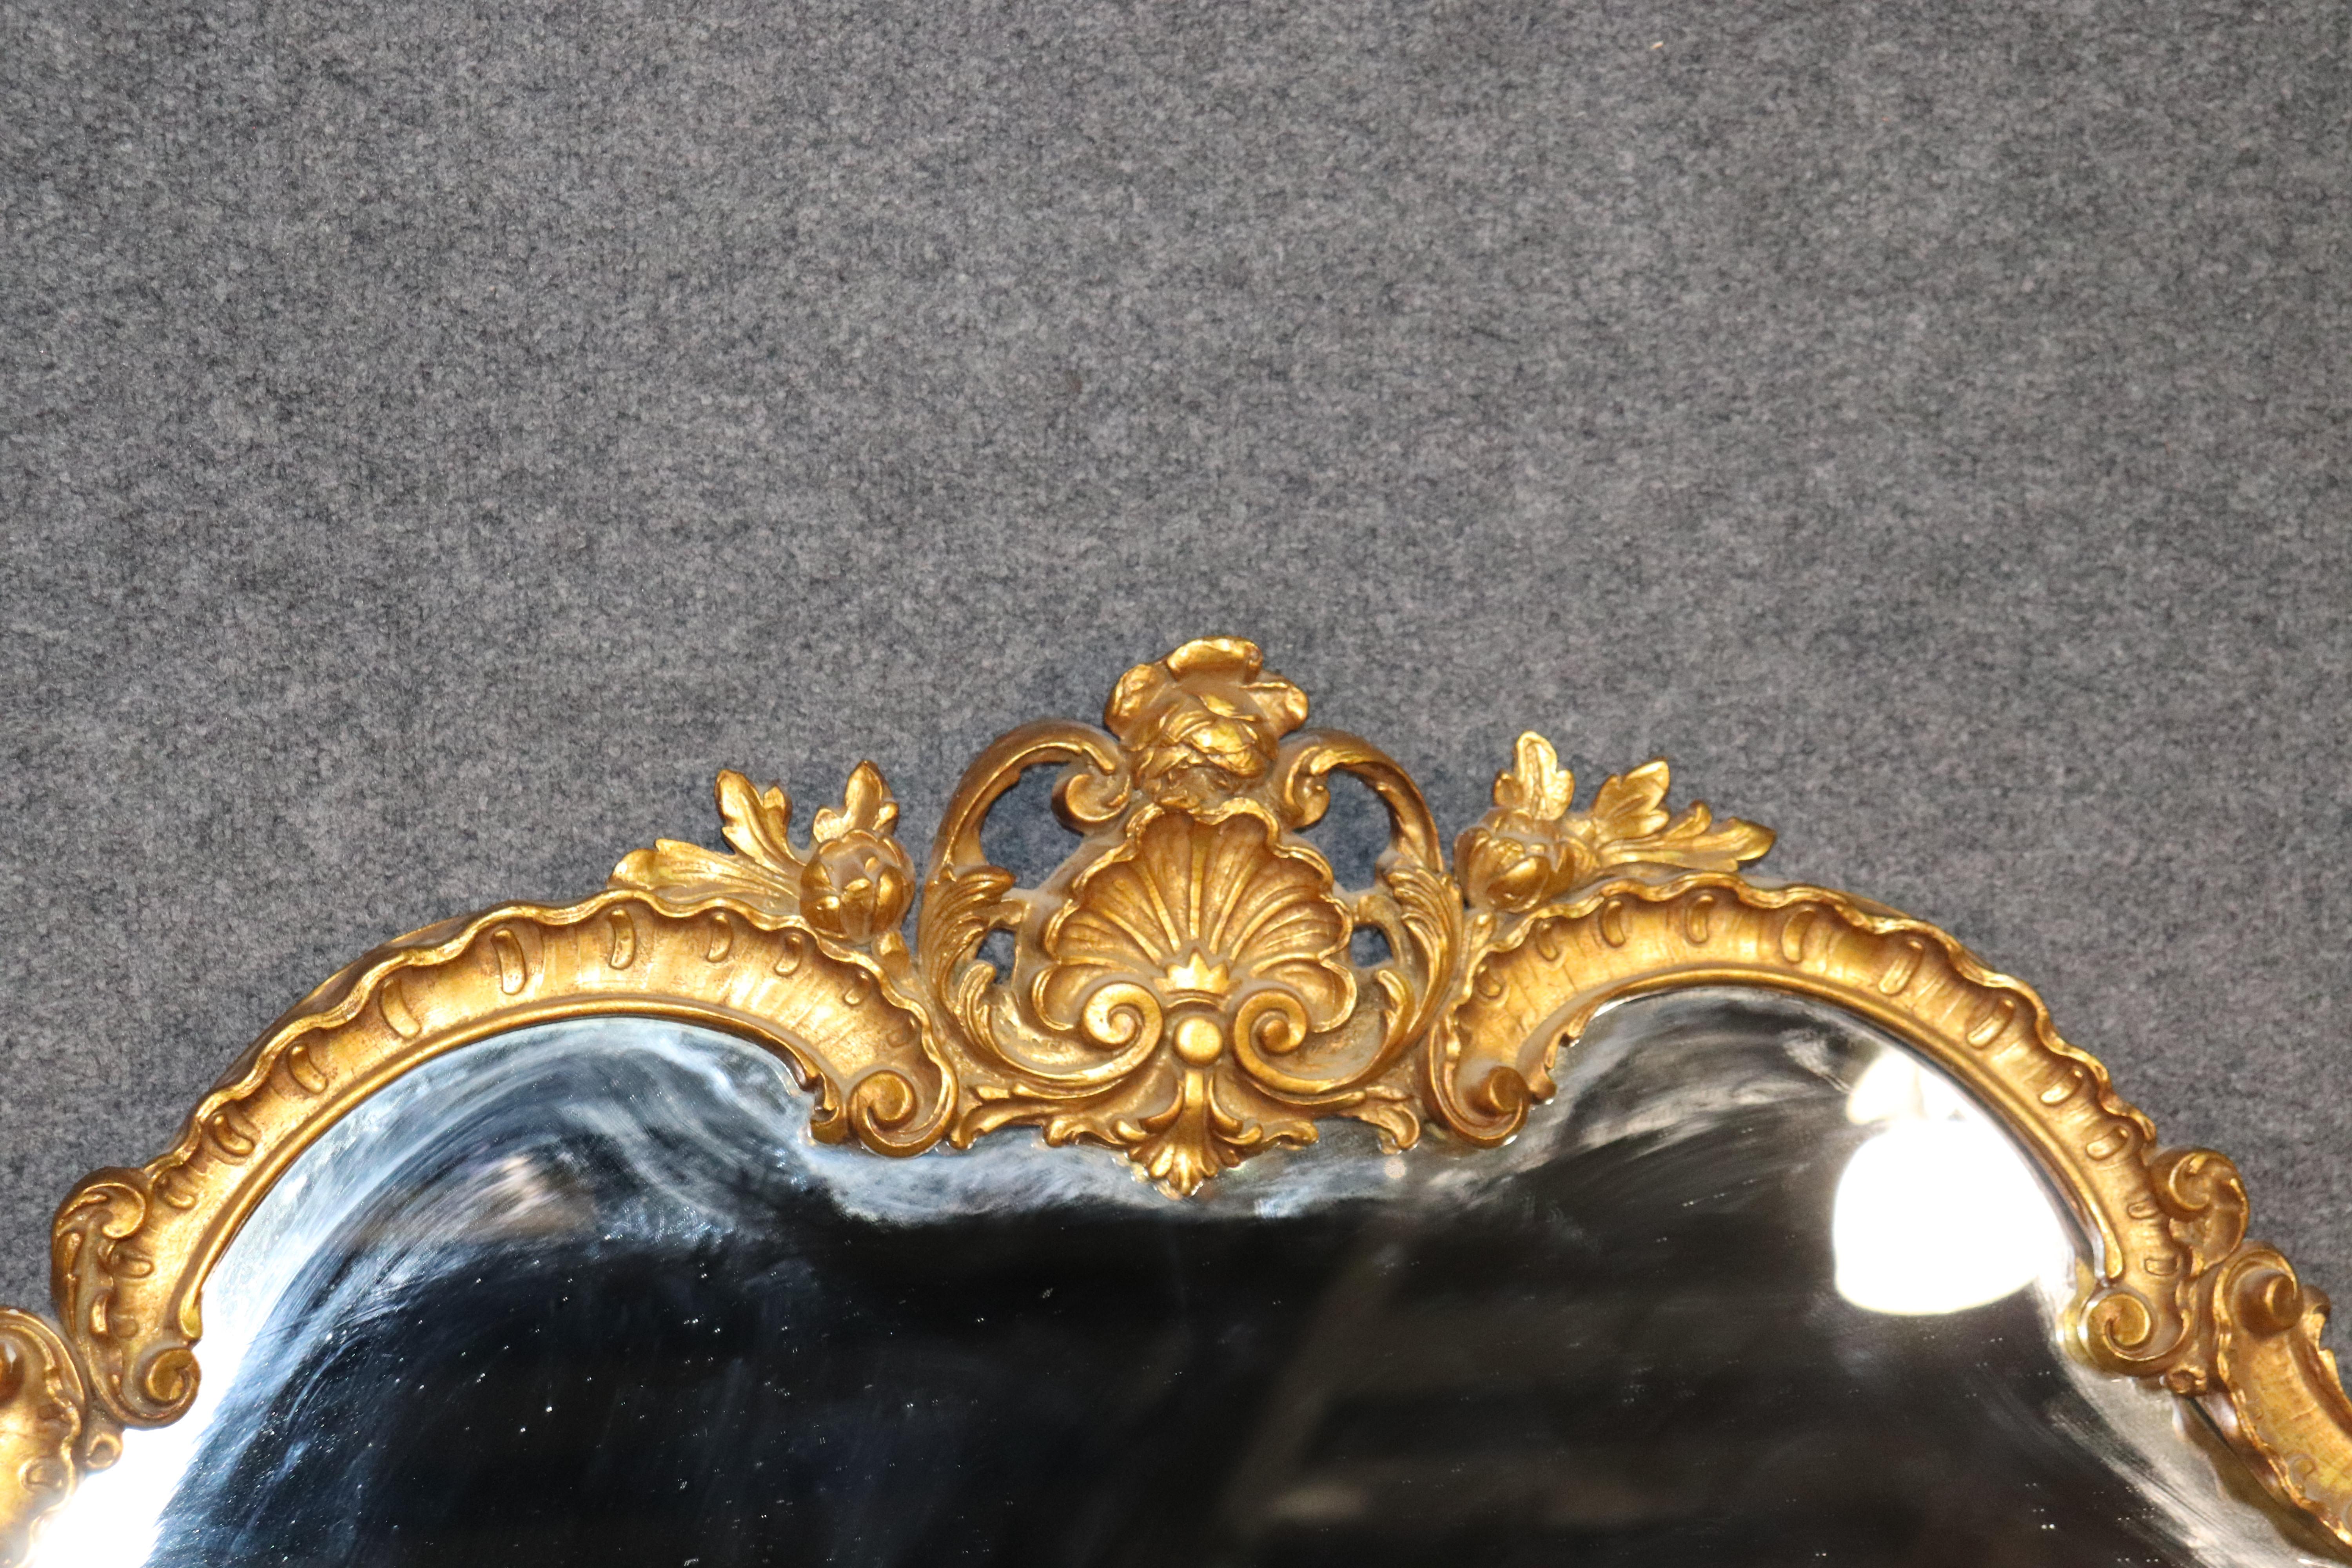 This is a fine quality 1940s era Decorative Arts Louis XV mirror. This is perfect for use over a mantel (fireplace) or a buffet or sideboard. The mirror is genuine gold leaf and has a nice patina to it. The mirror measures 55 wide x 44.5 tall x 3